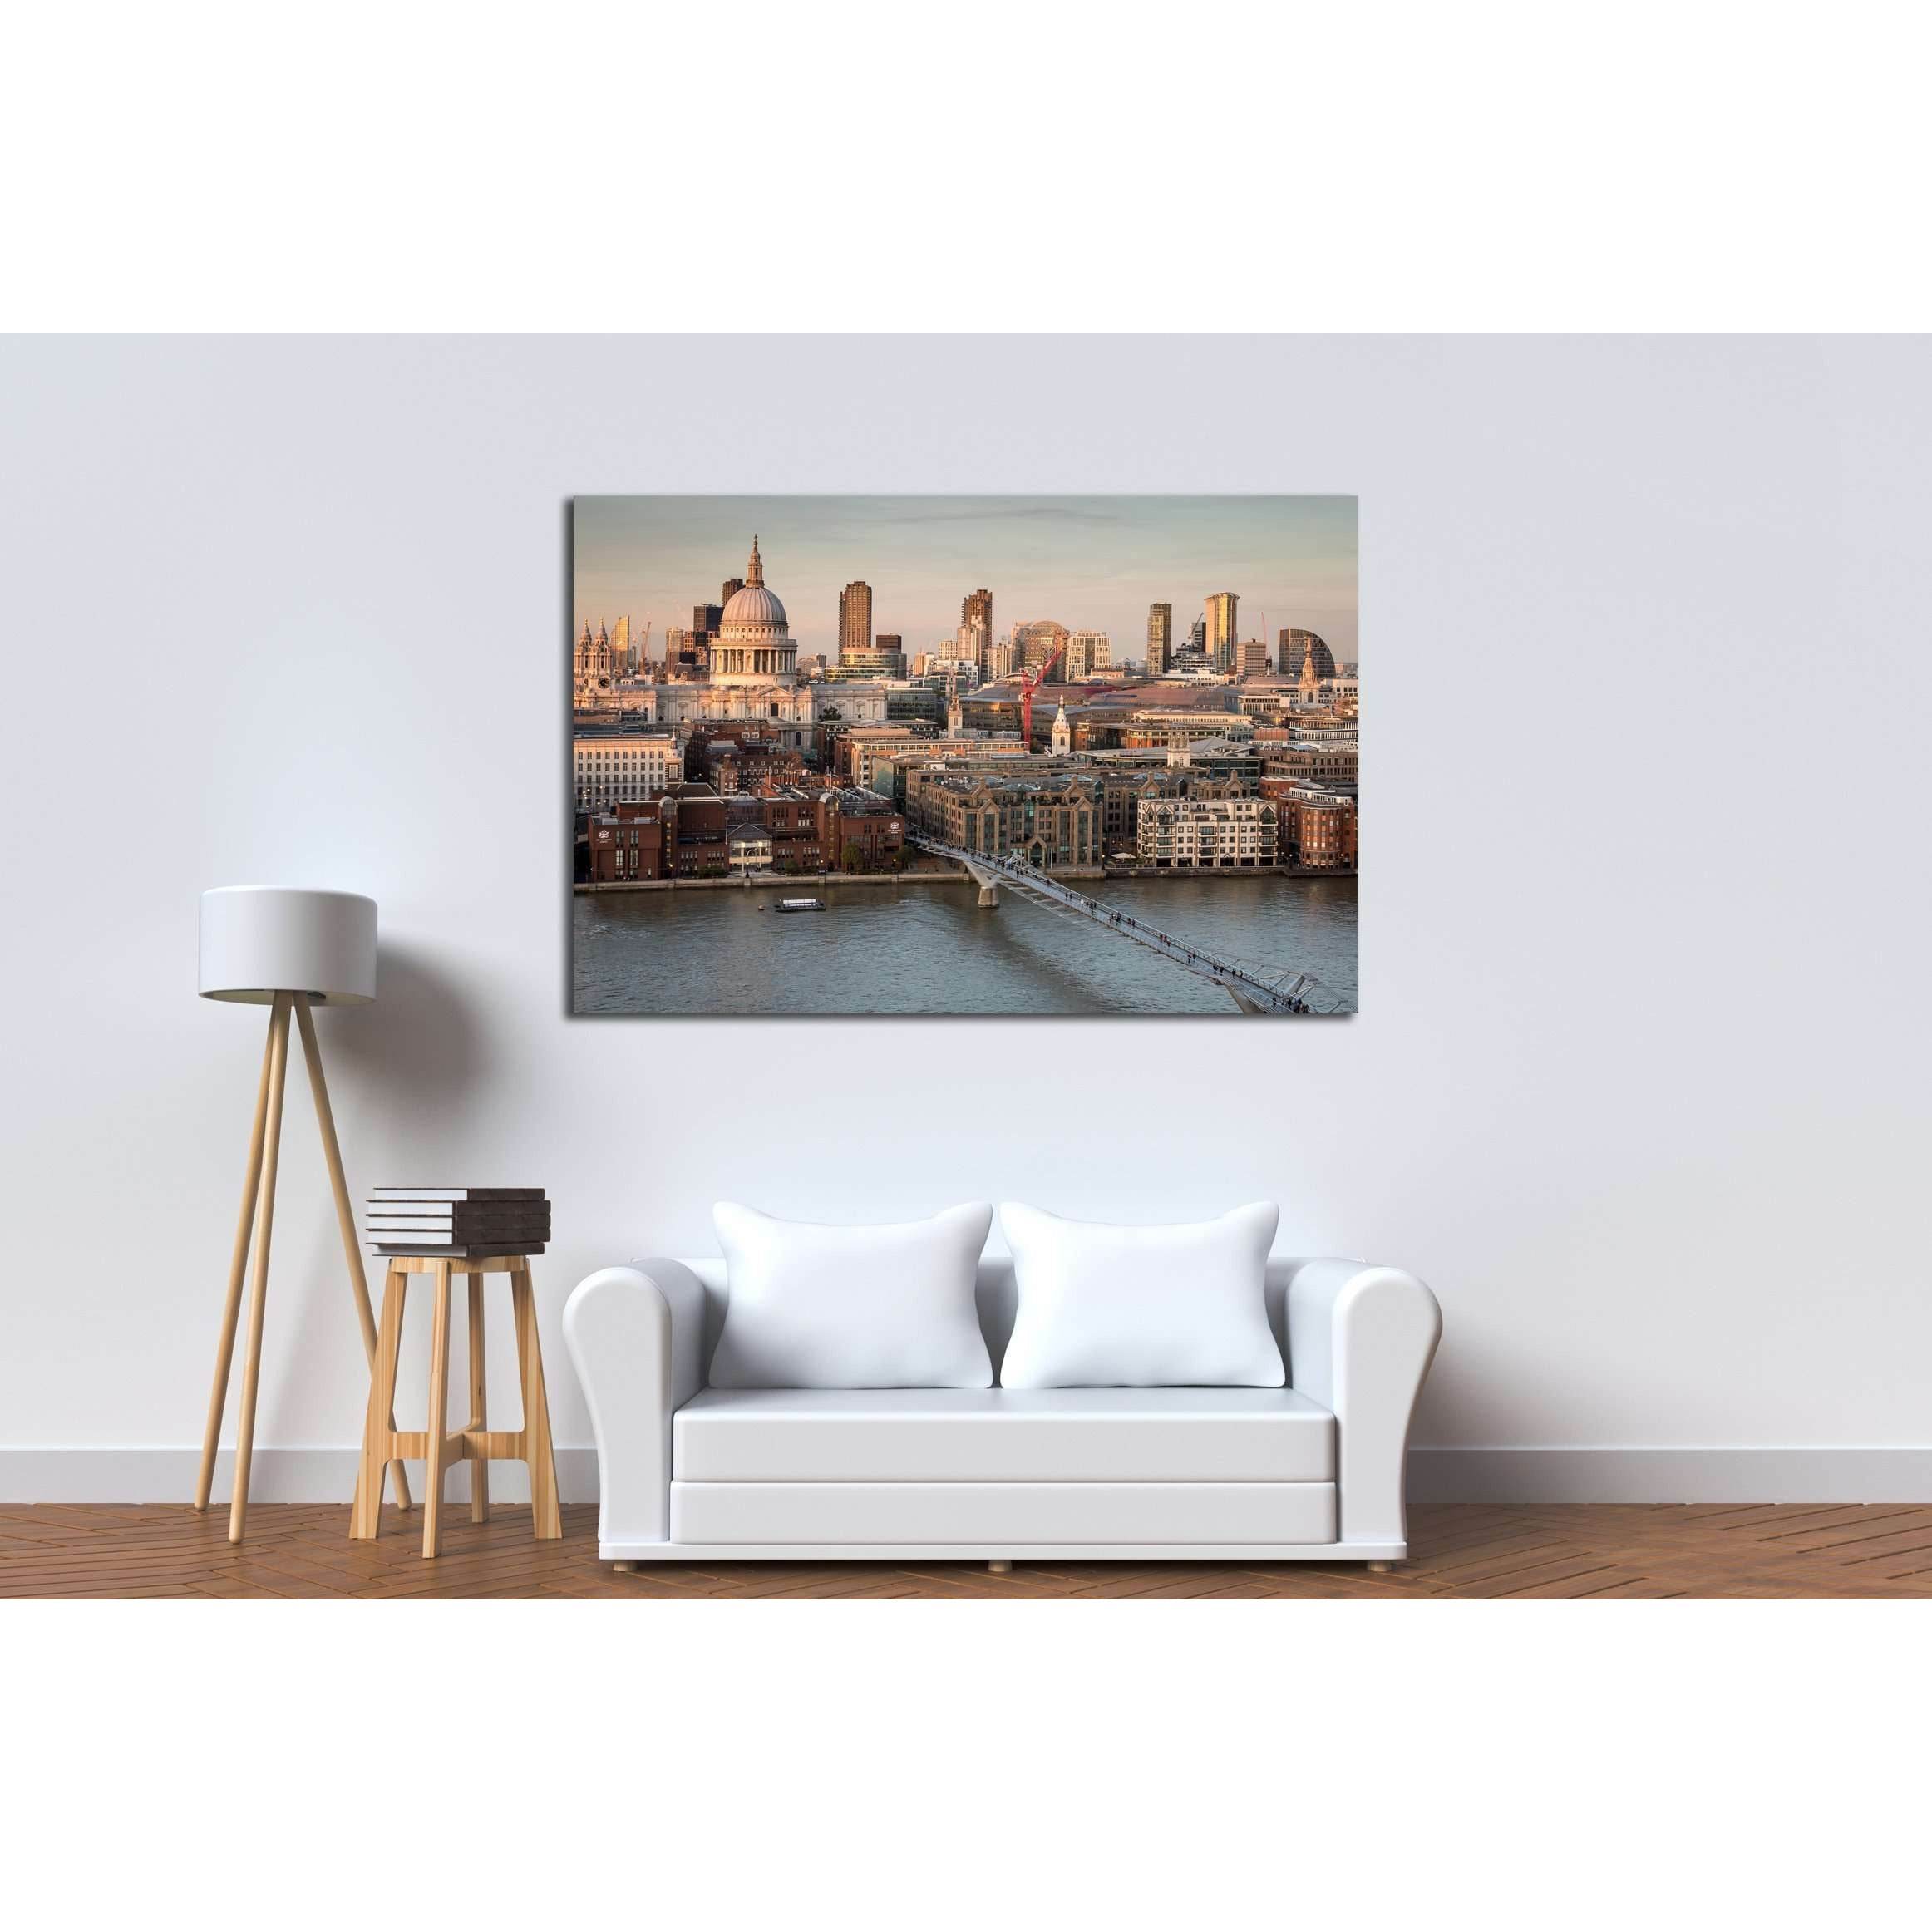 St. Paul's Cathedral and the City of London skyline №2972 Ready to Han